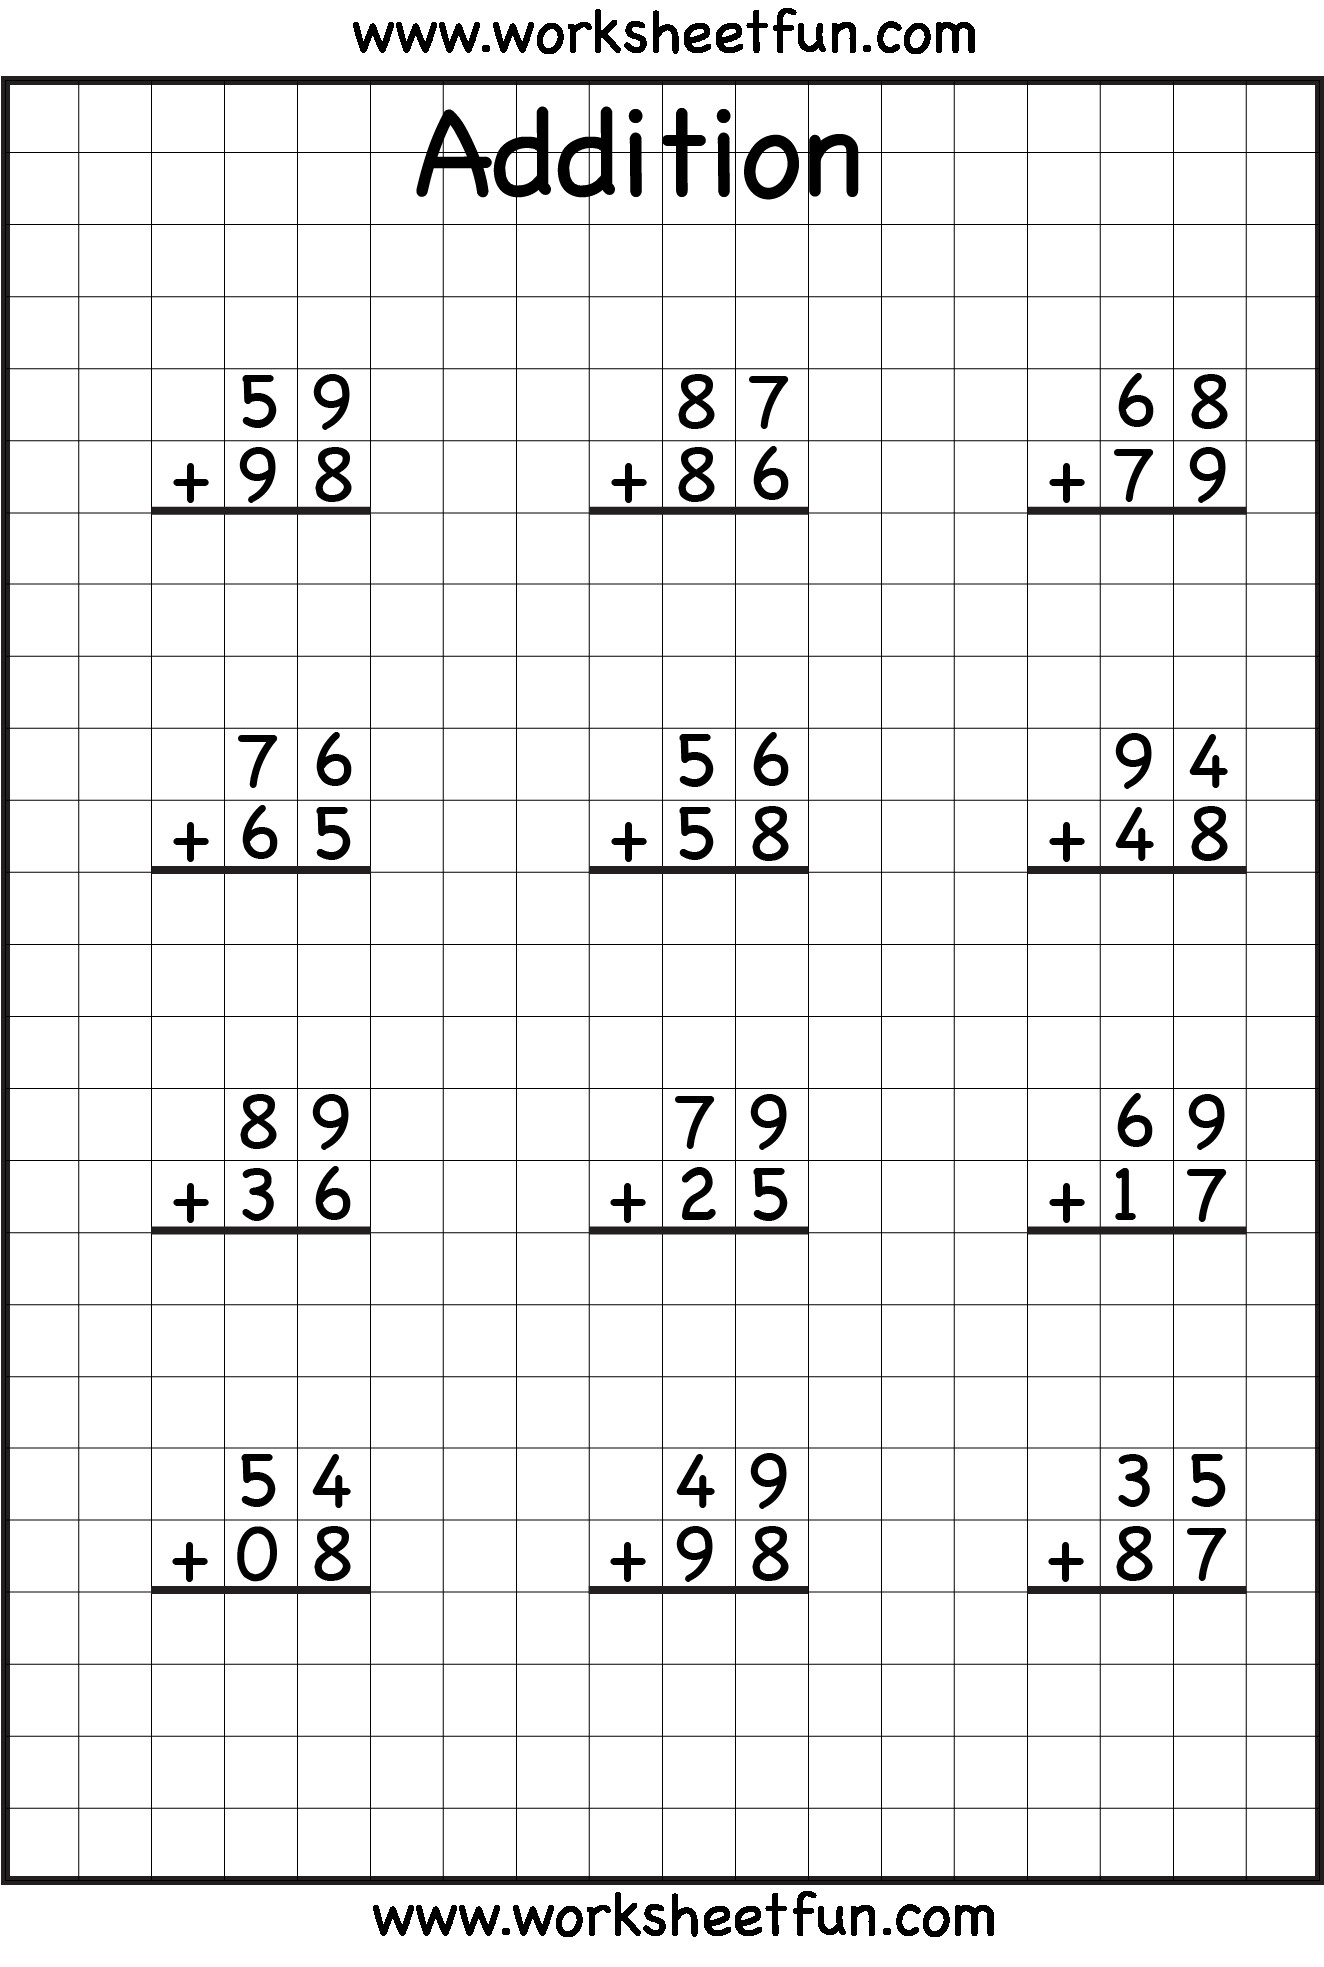 5 Free Math Worksheets Third Grade 3 Addition Add 3 3 Digit Numbers In